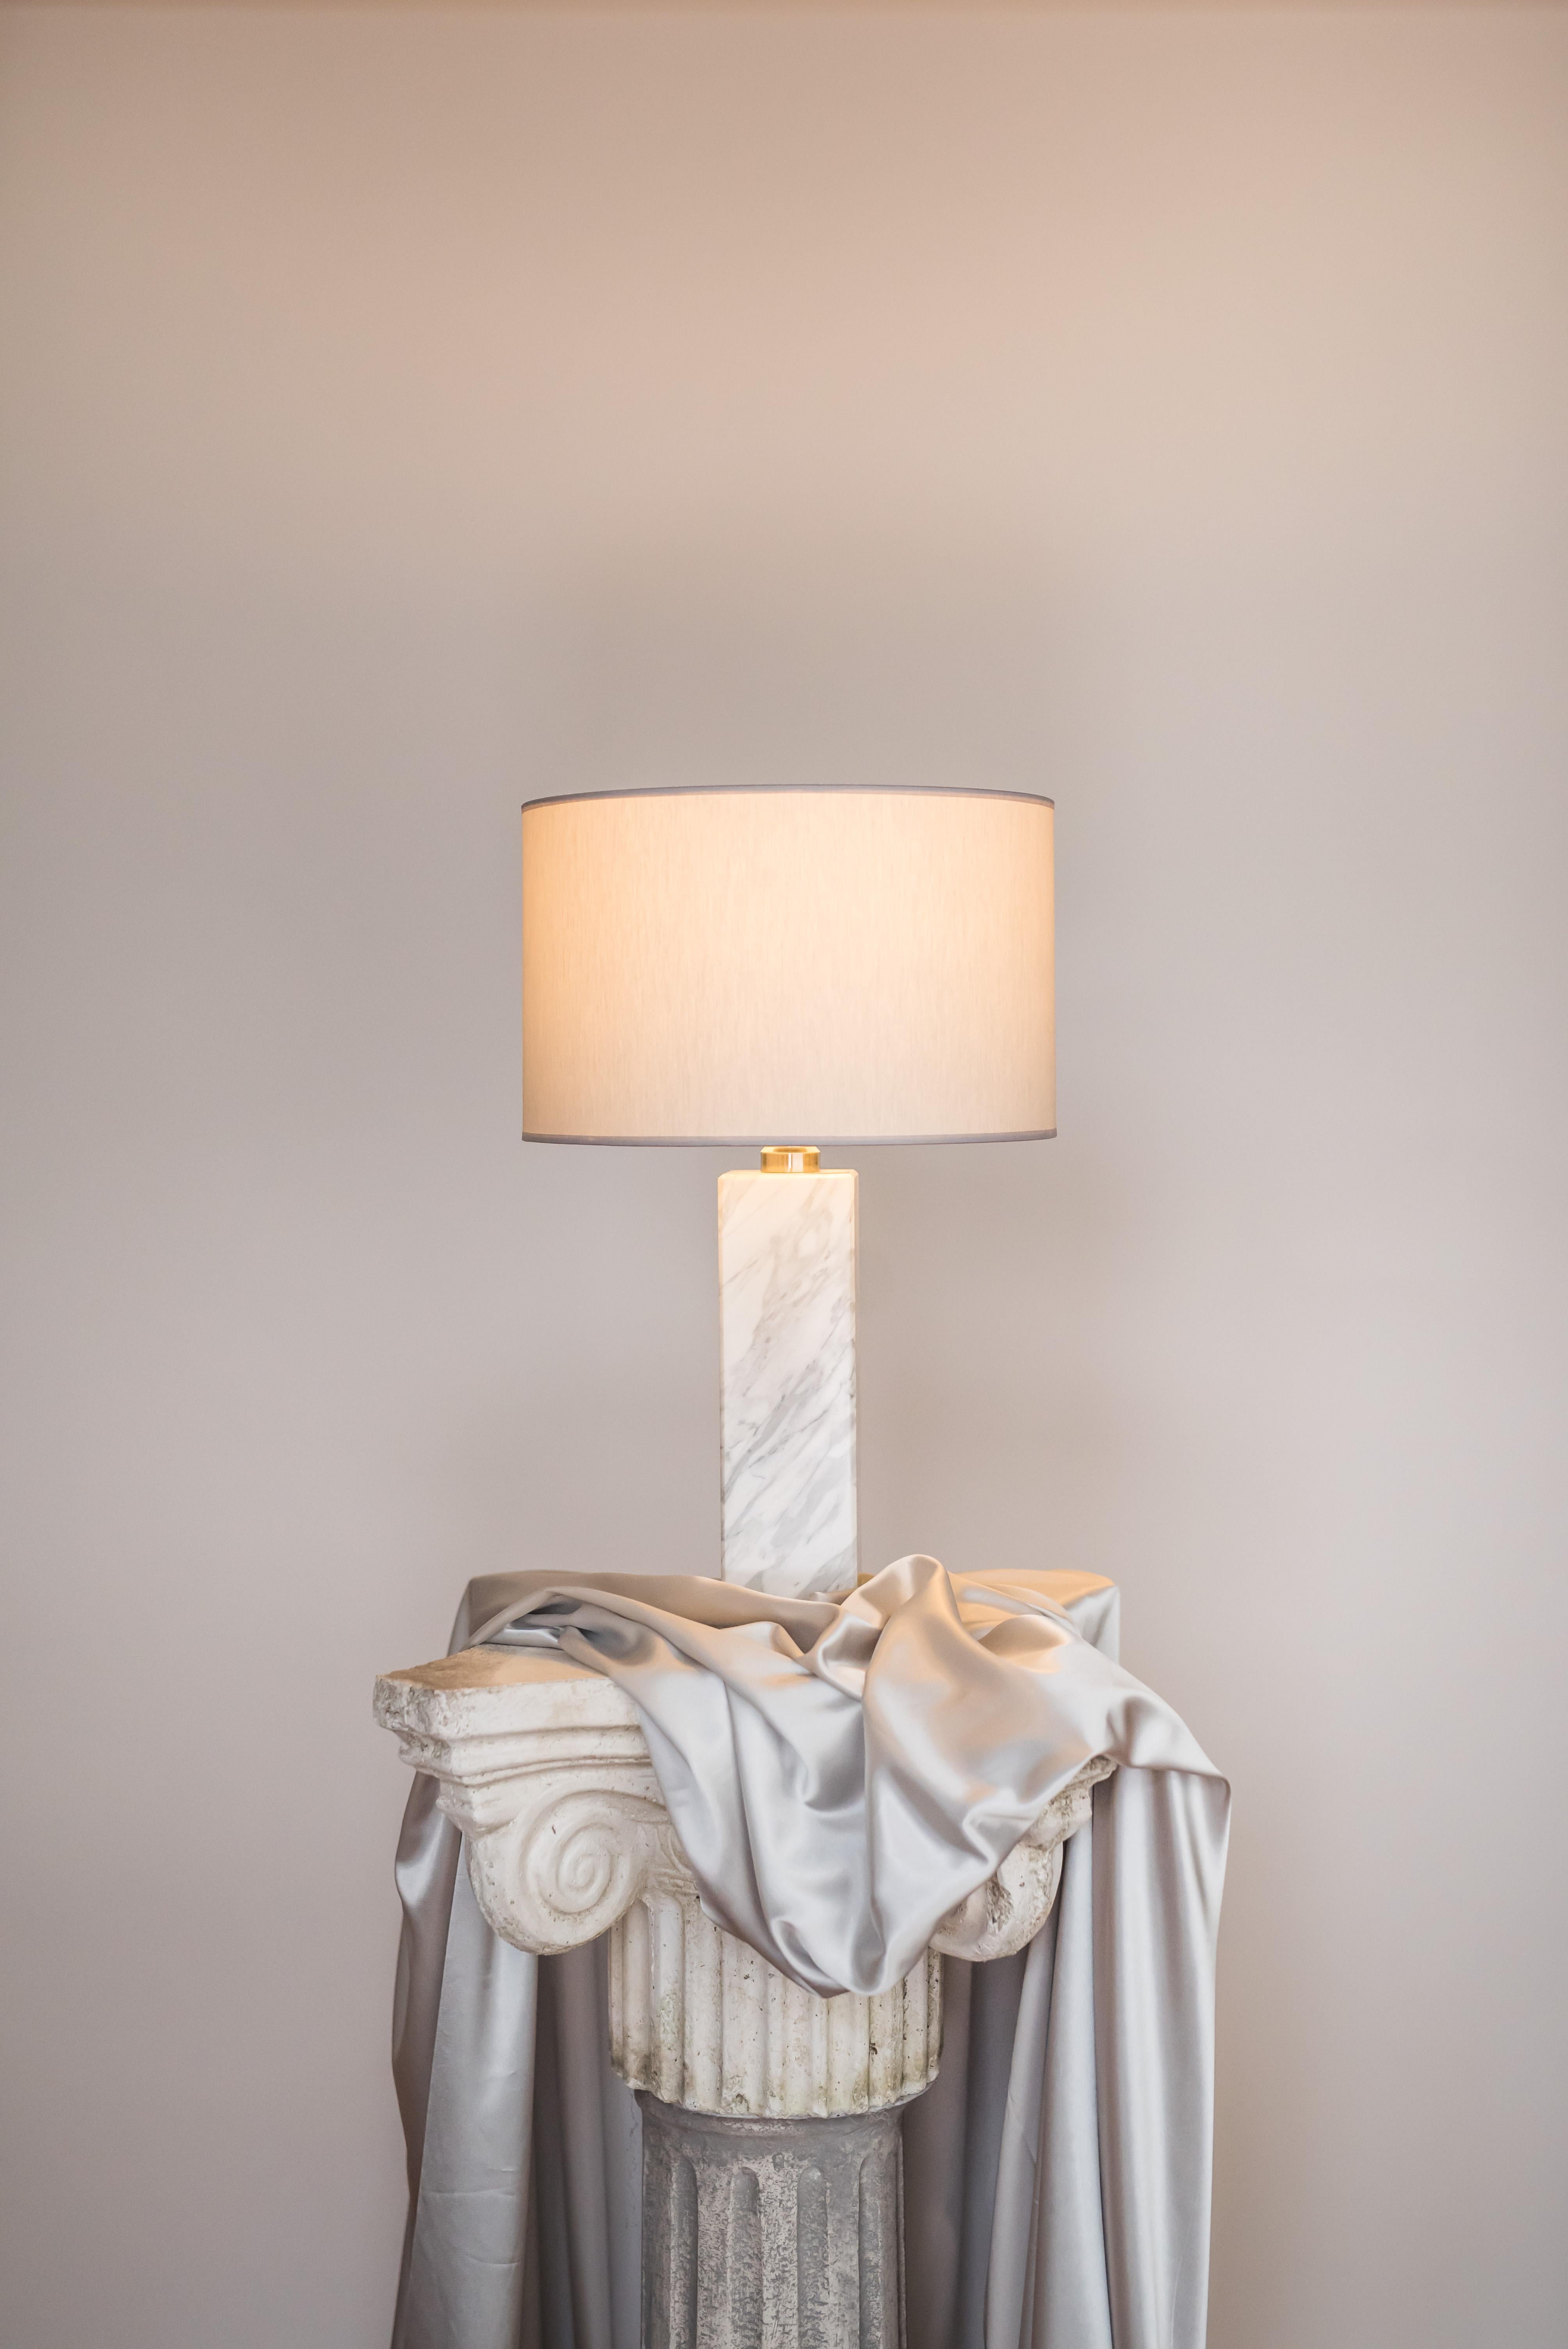 Brass sculpted table lamp by Brajak Vitberg
ATHENS 1.2
Mura marble (also available with Carrara marble)
Polished brass
Dimensions: 52 x 35 x 35 cm
white or black cotton lampshade, cotton wiring


Bijelic and Brajak are two architects from Ljubljana,